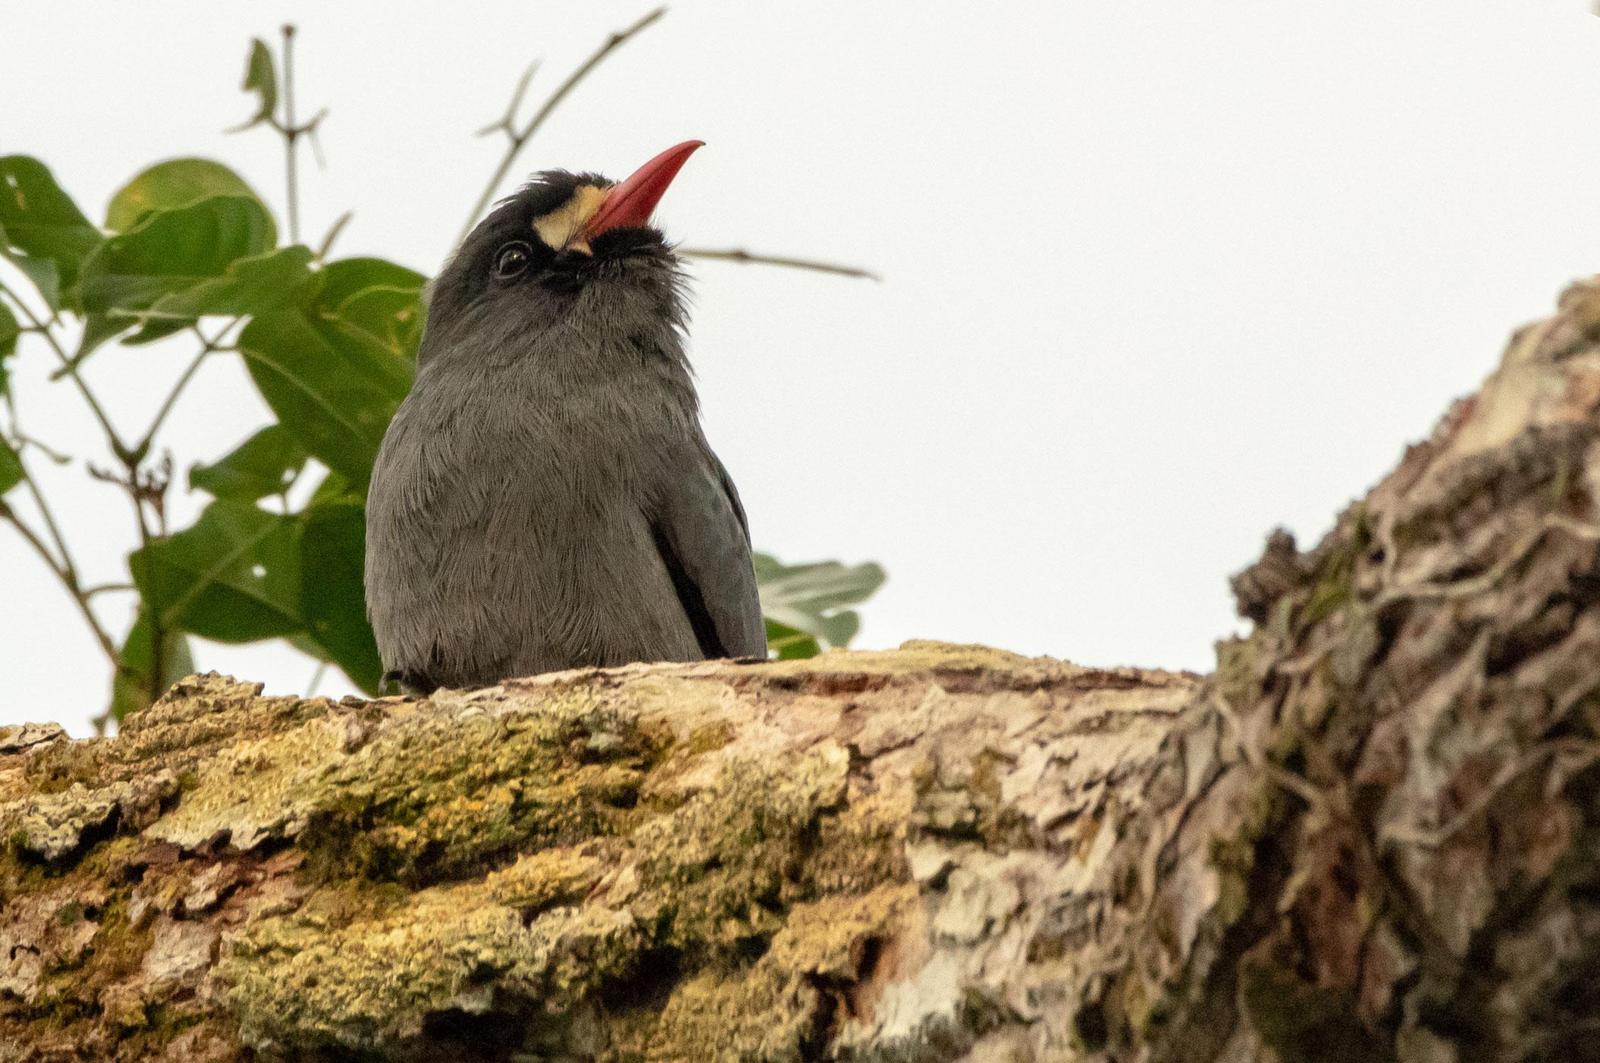 White-fronted Nunbird Photo by Phil Kahler